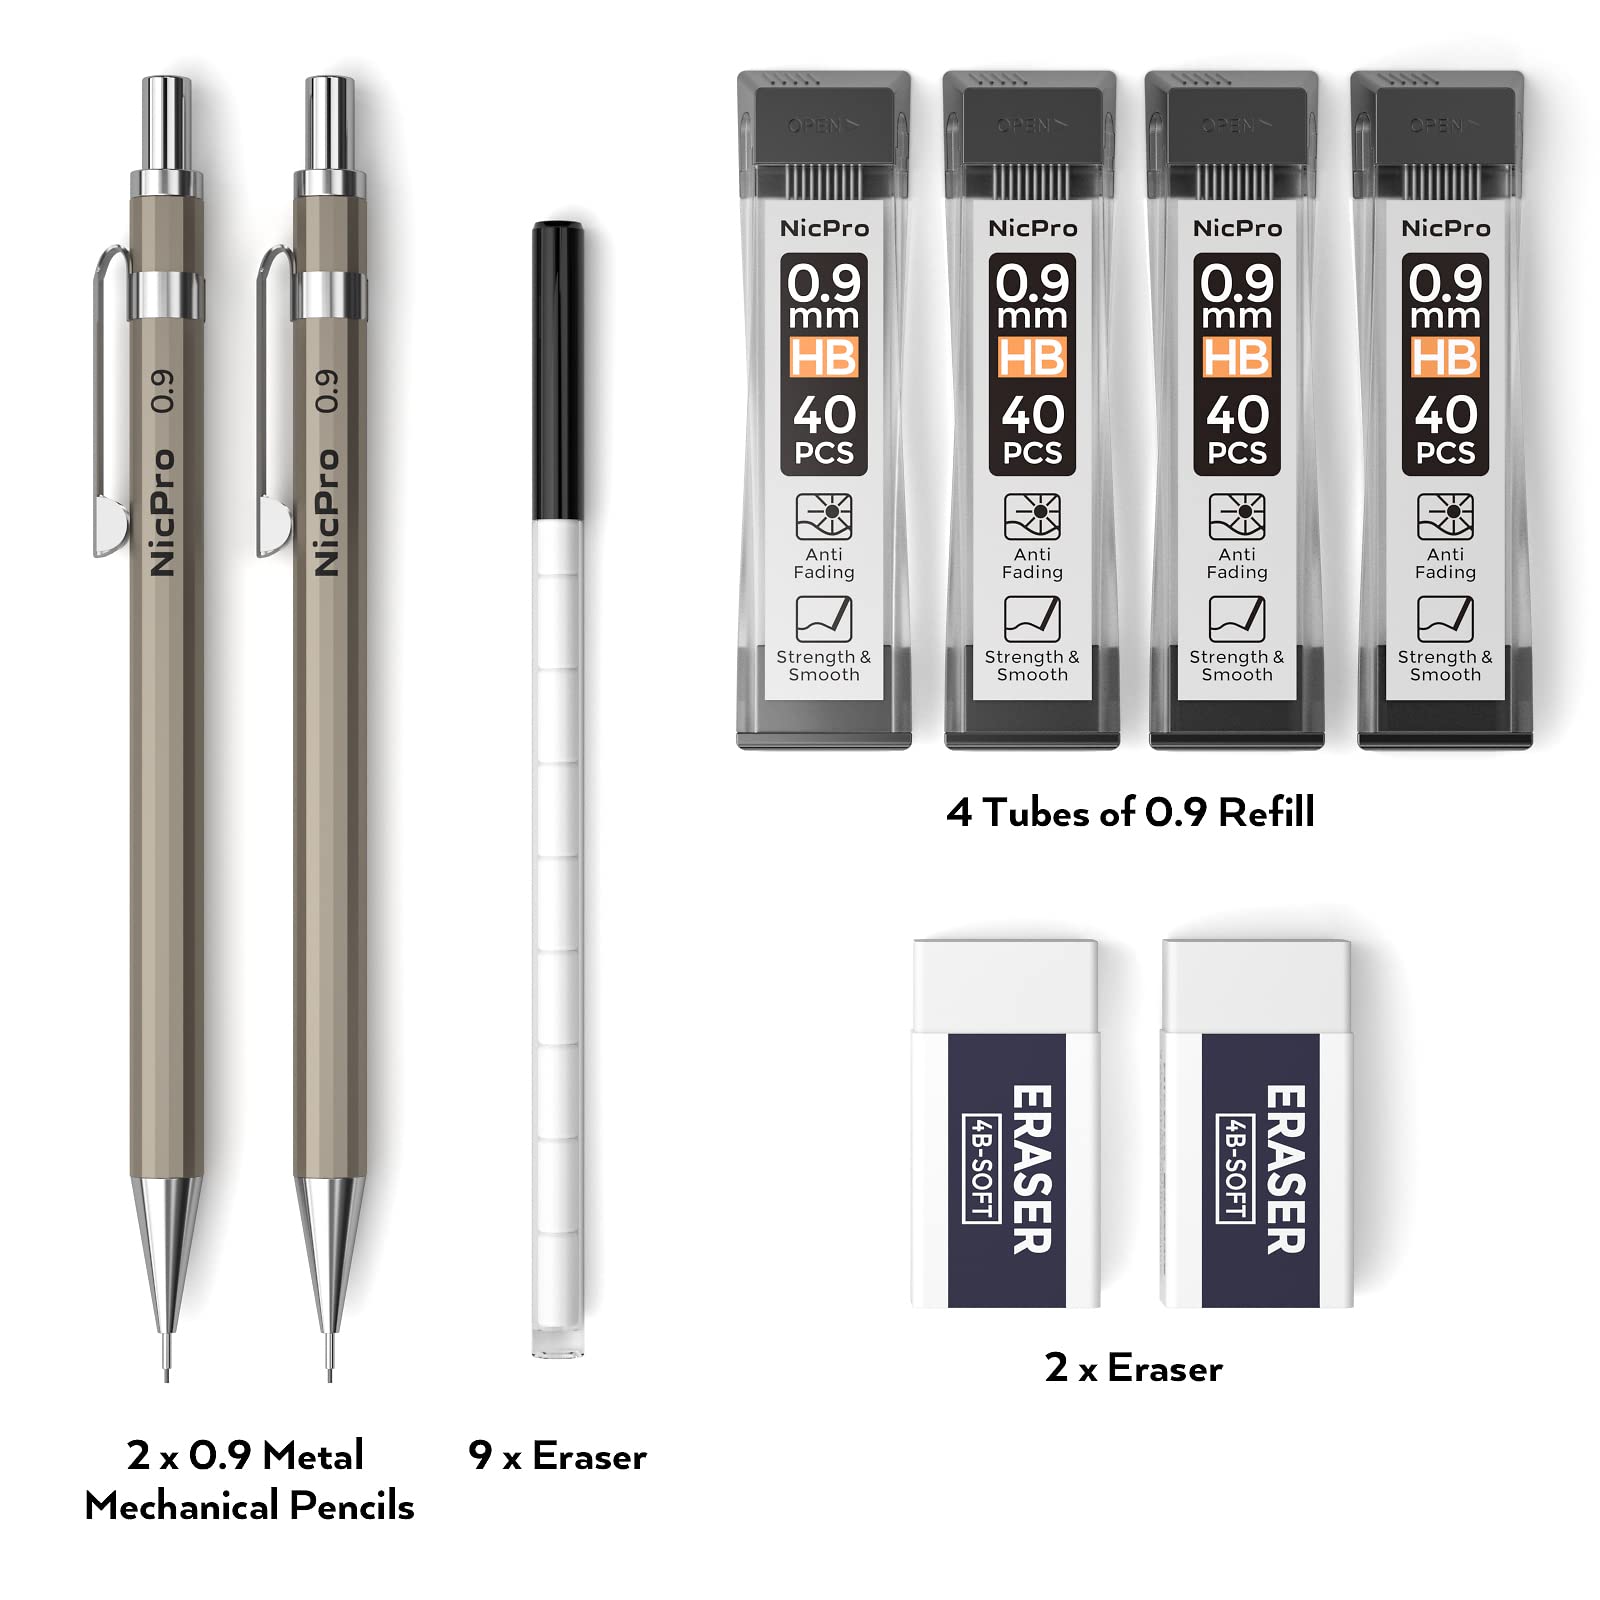 Metal 0.9 mm Mechanical Pencil Set with Case, 2 PCS Nicpro Drafting Pencil with Lead Refill & Erasers for Artist Writing, Drawing Sketching